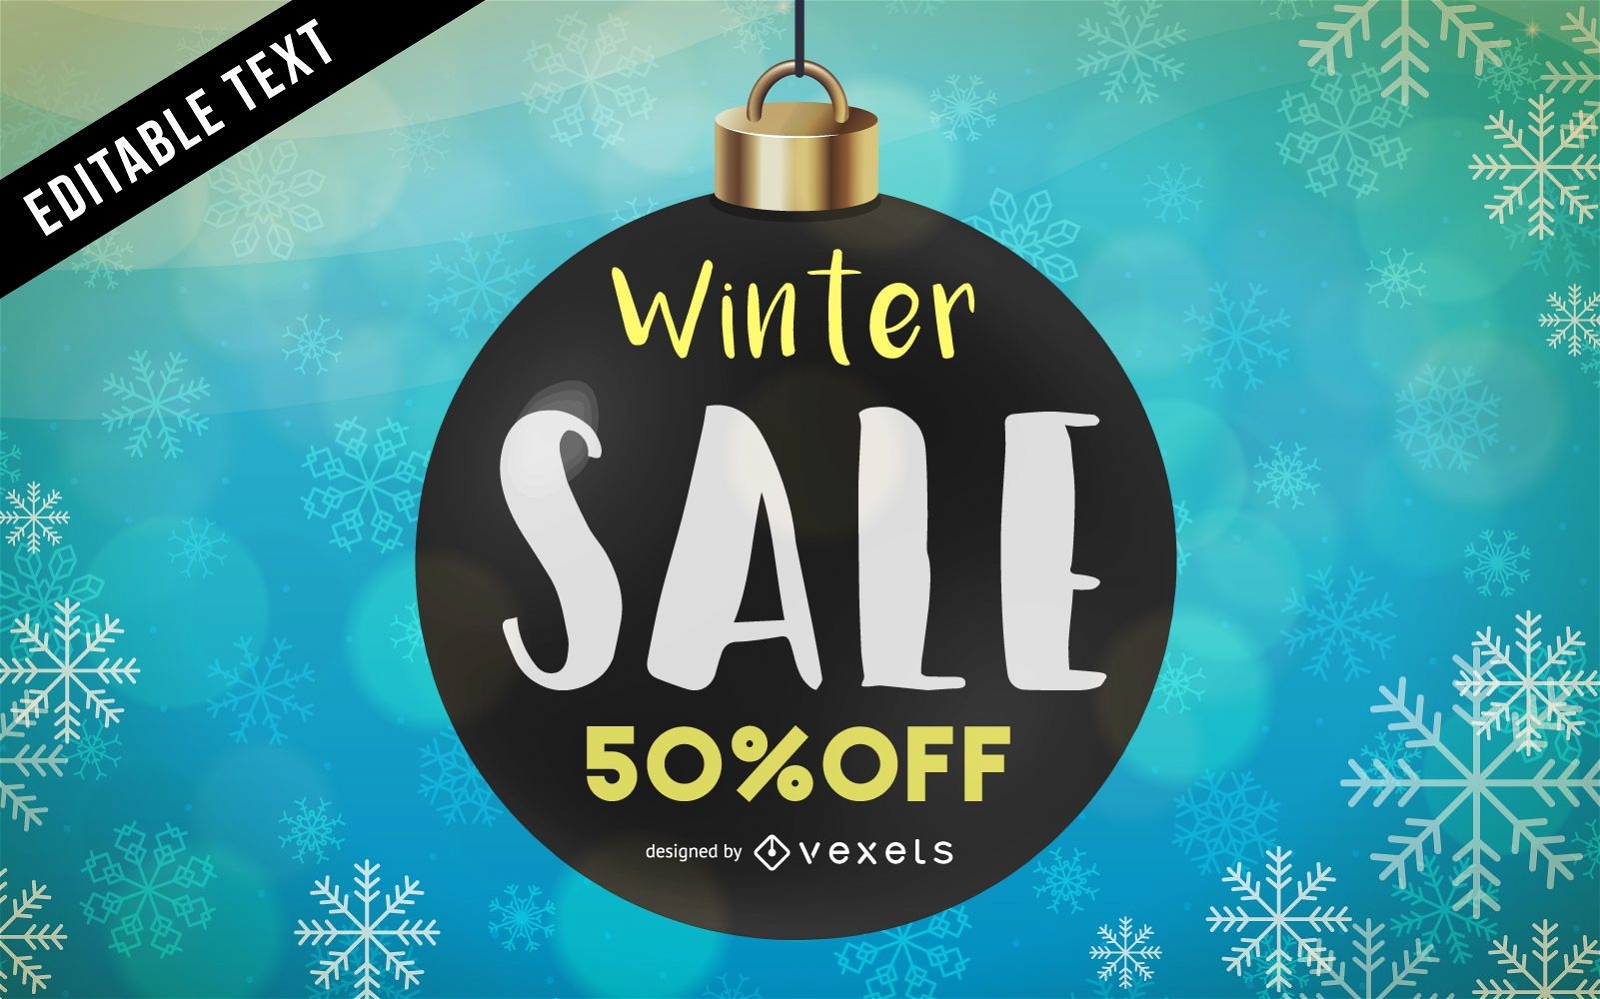 Winter sale with snowflakes 